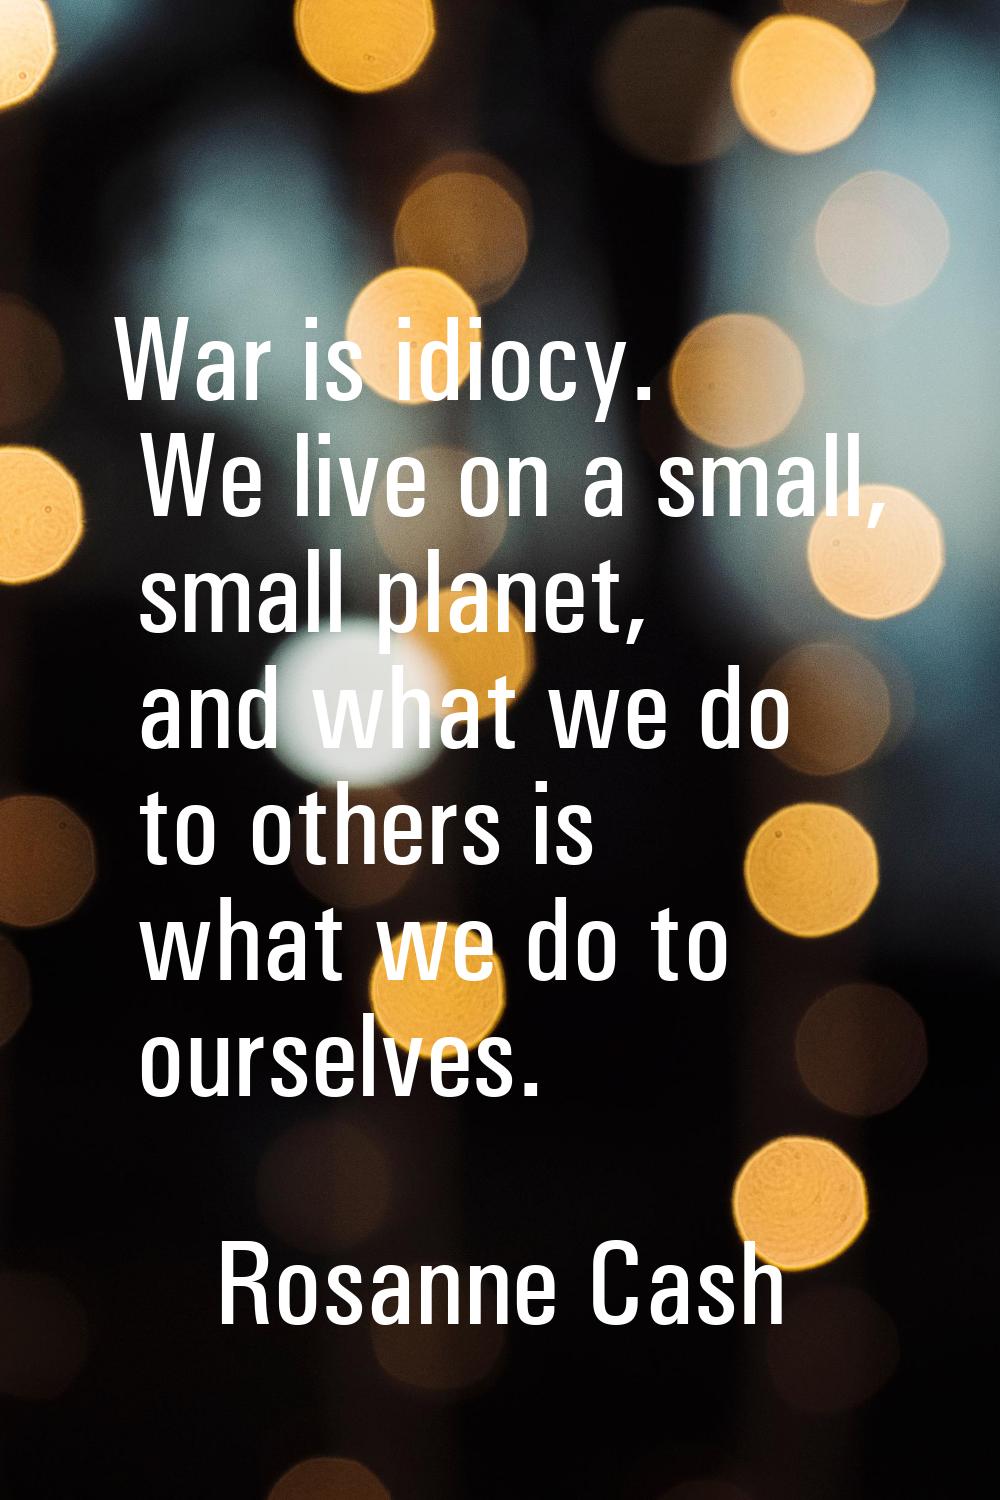 War is idiocy. We live on a small, small planet, and what we do to others is what we do to ourselve